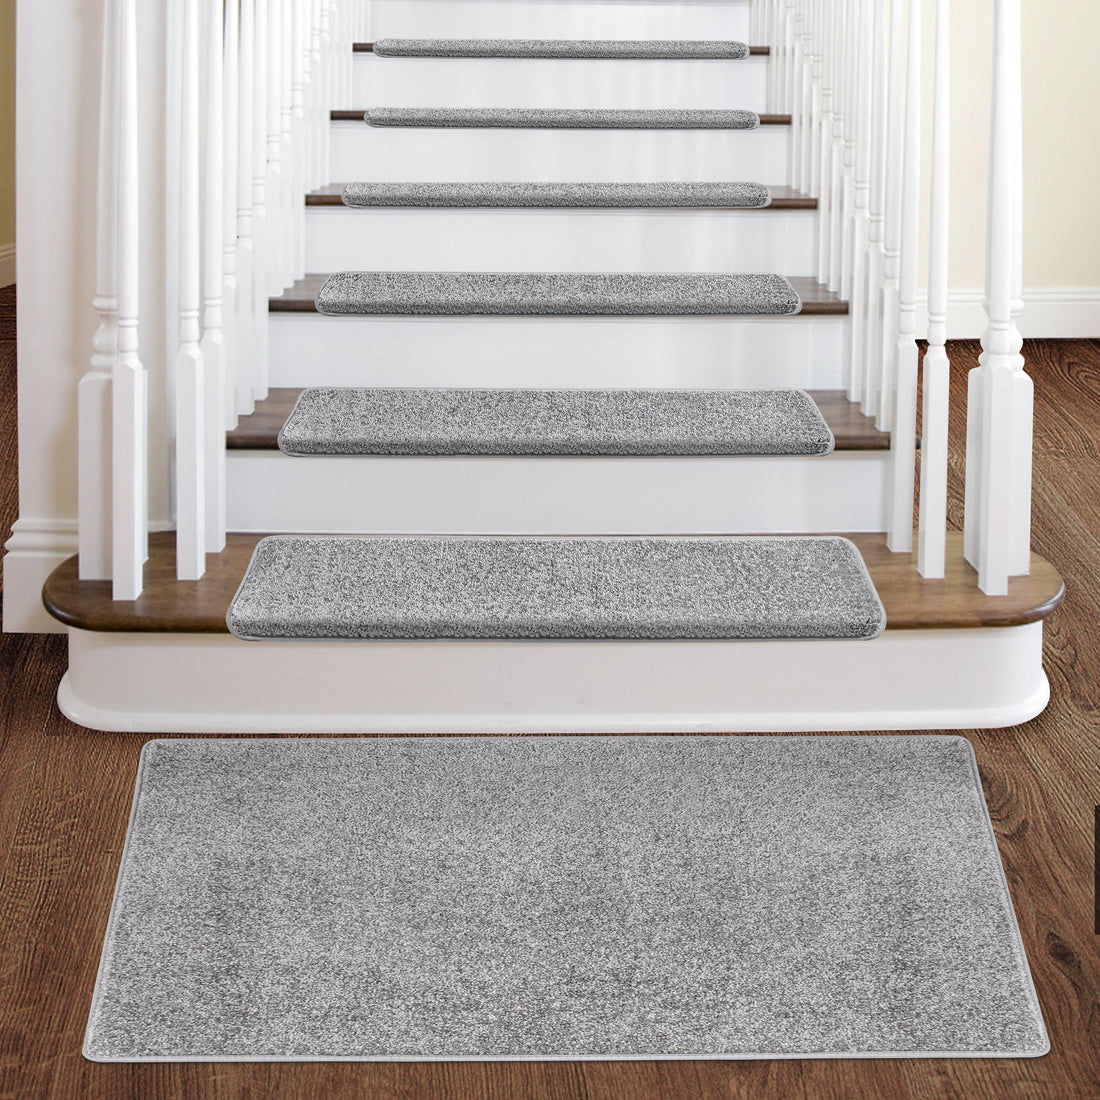 Top 7 Best Rug Pads for Hardwood Floors/Carpet & Stairs [Review